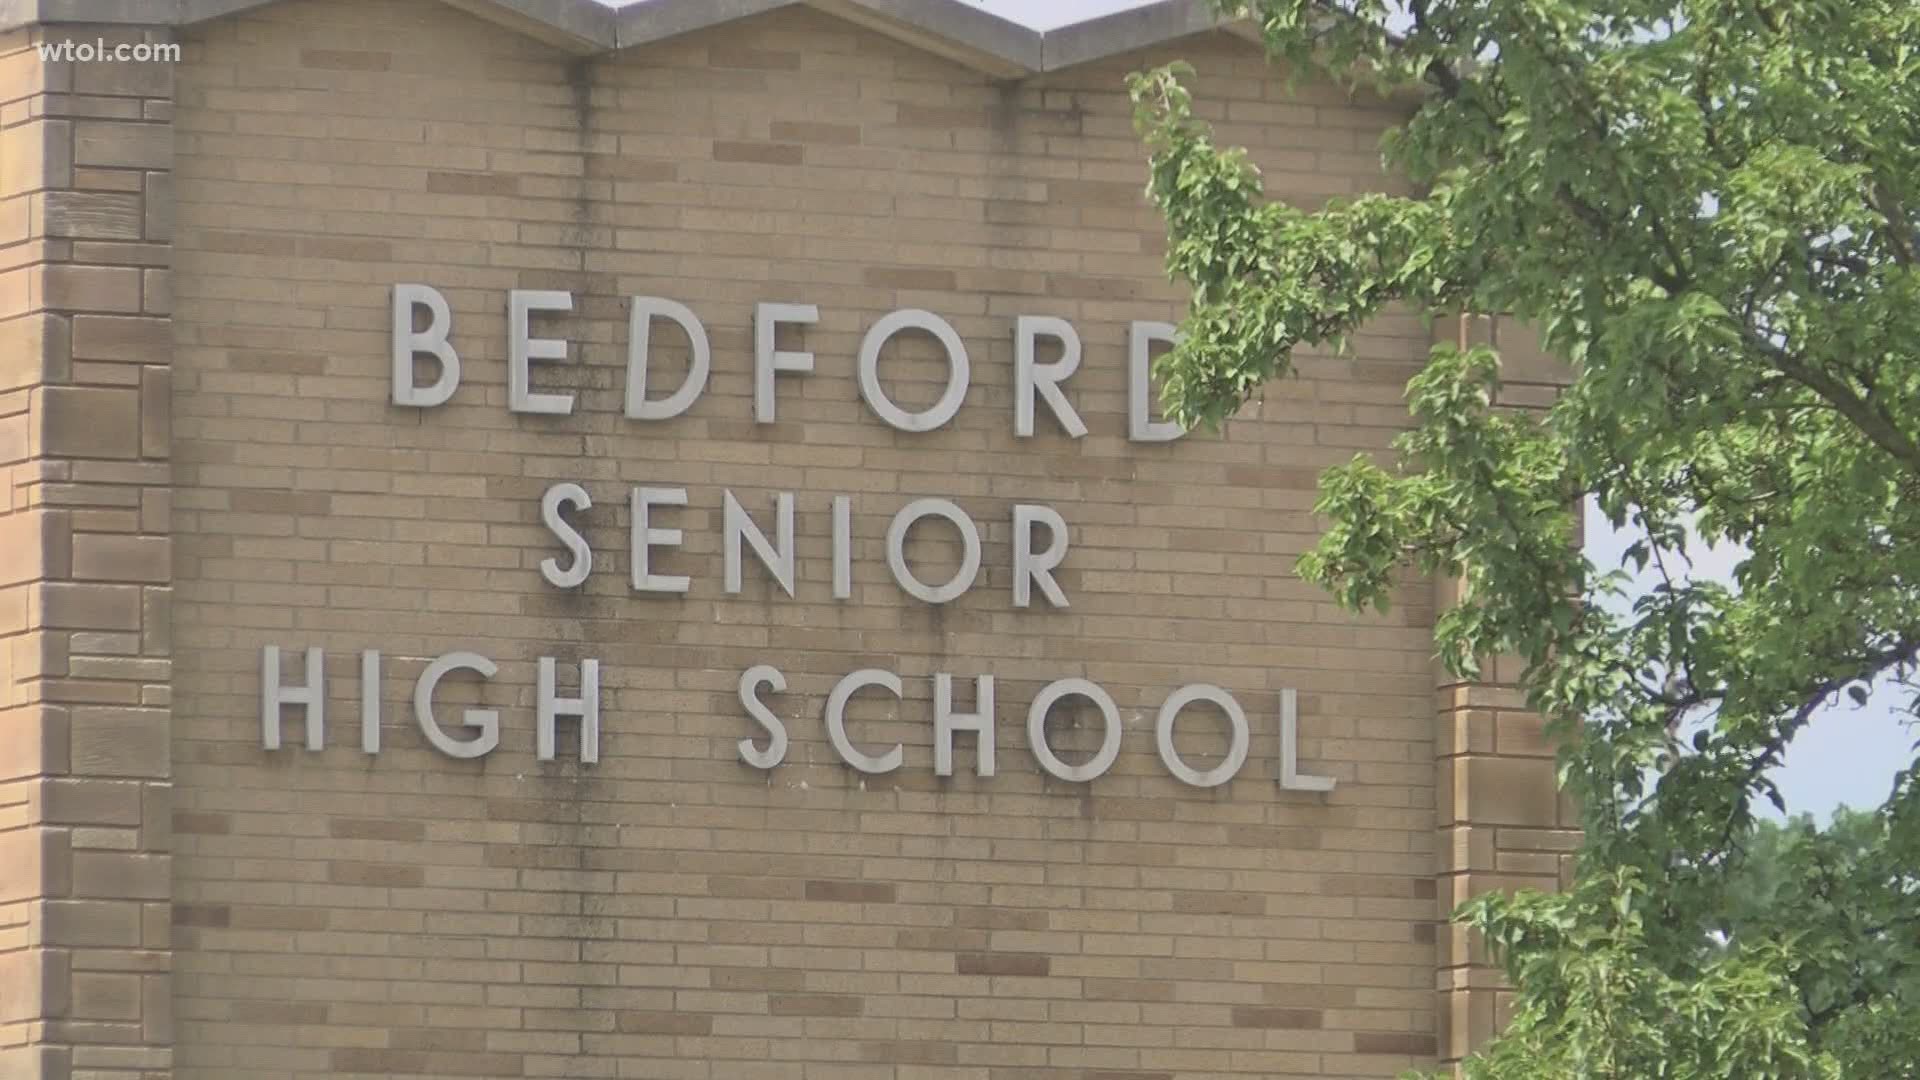 Leaders at Bedford Public Schools say they still have some time to finalize what they're doing. They are using the extra weeks to their advantage.